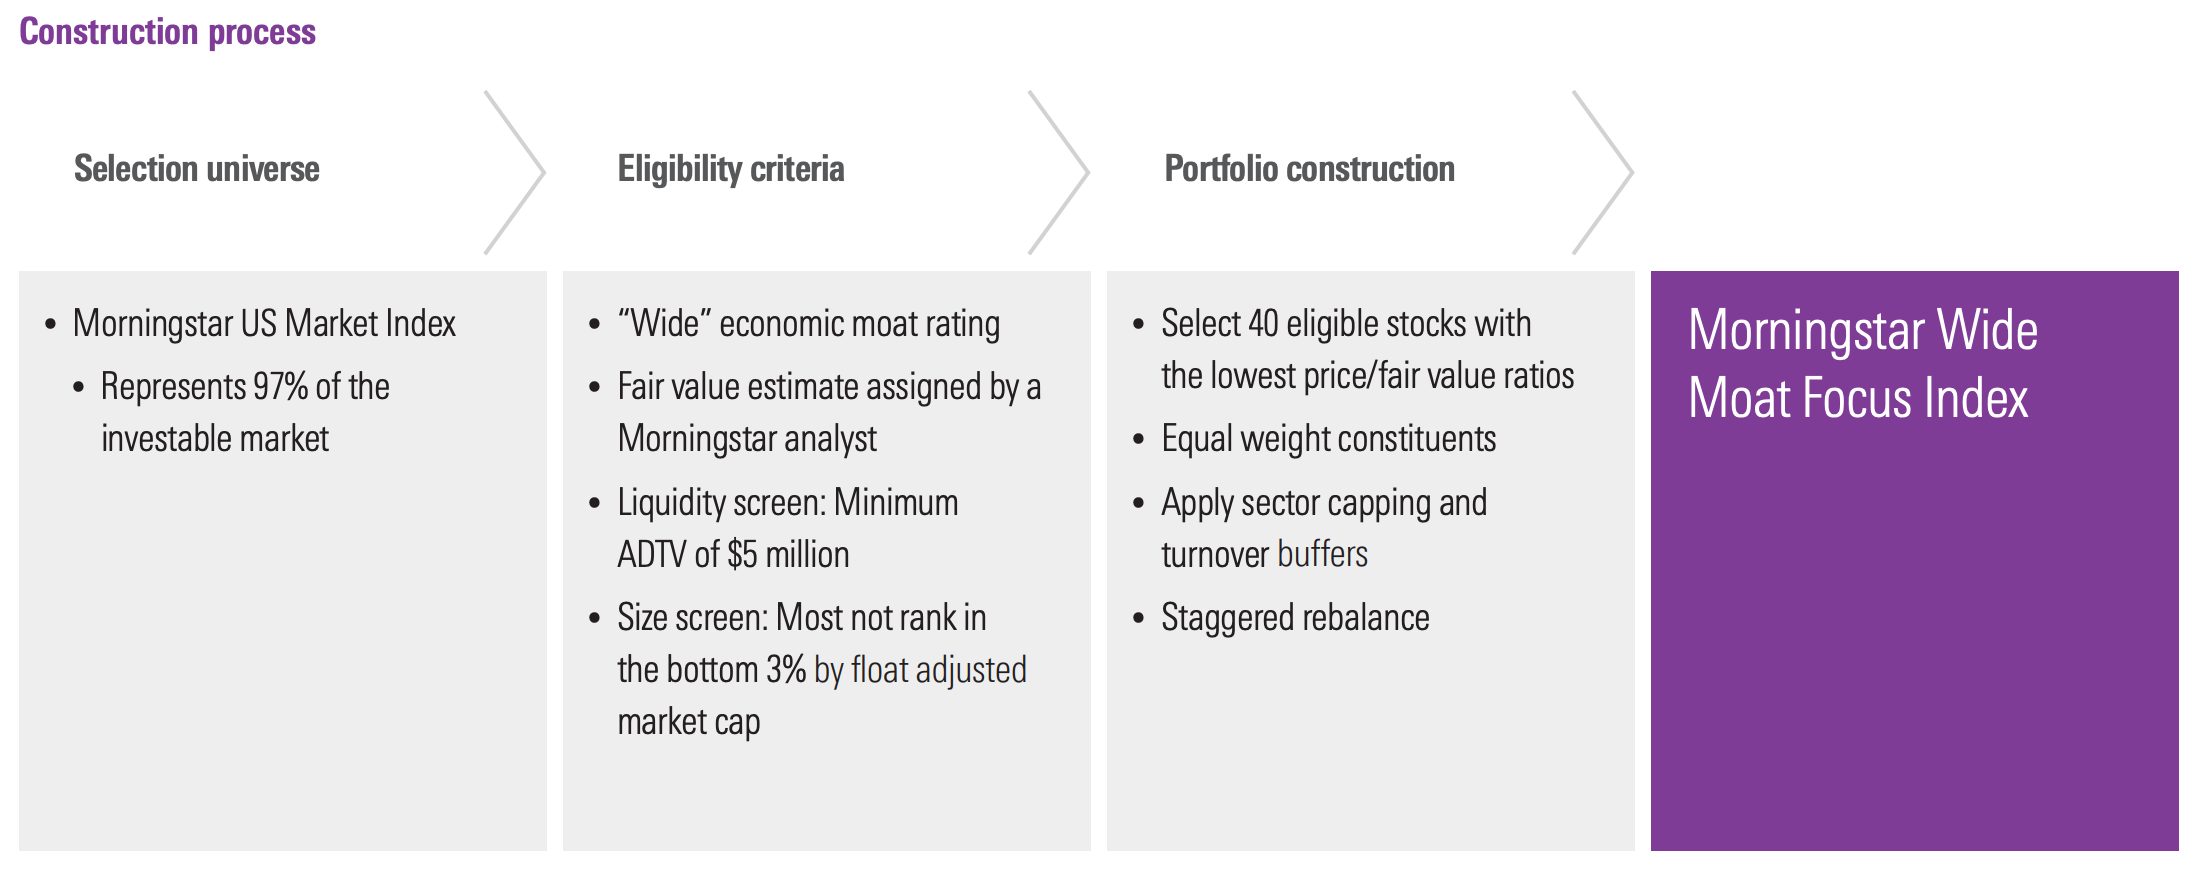 Morningstar Wide Moat Index Construction and Selection Process for Securities